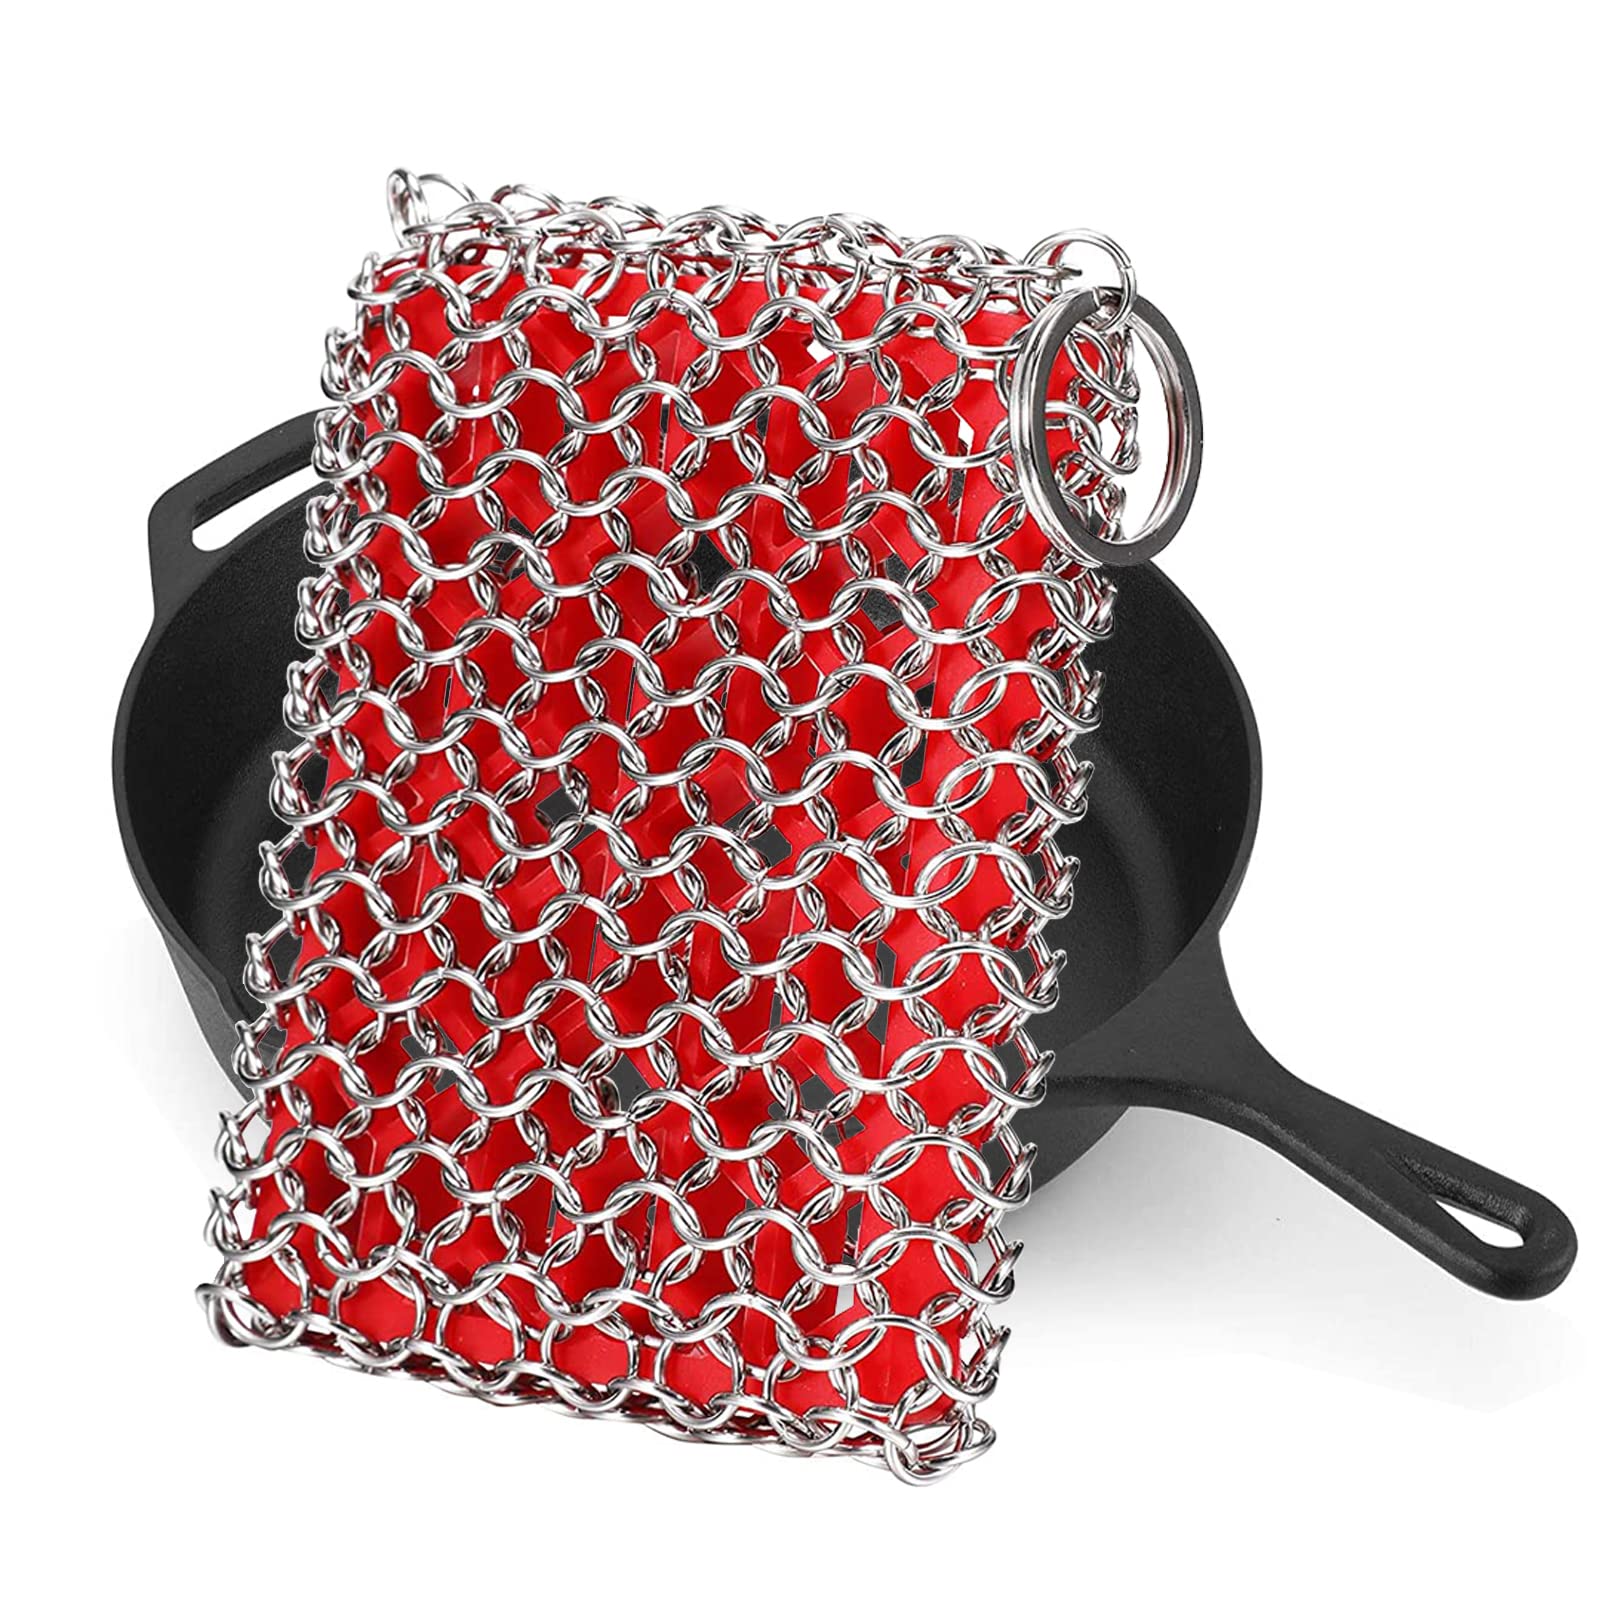 Cast Iron Skillet Cleaner, 316 Stainless Steel Chainmail Cleaning Scrubber  with Silicone Insert for Cleaning Castiron Pan,Griddle,Baking Pan